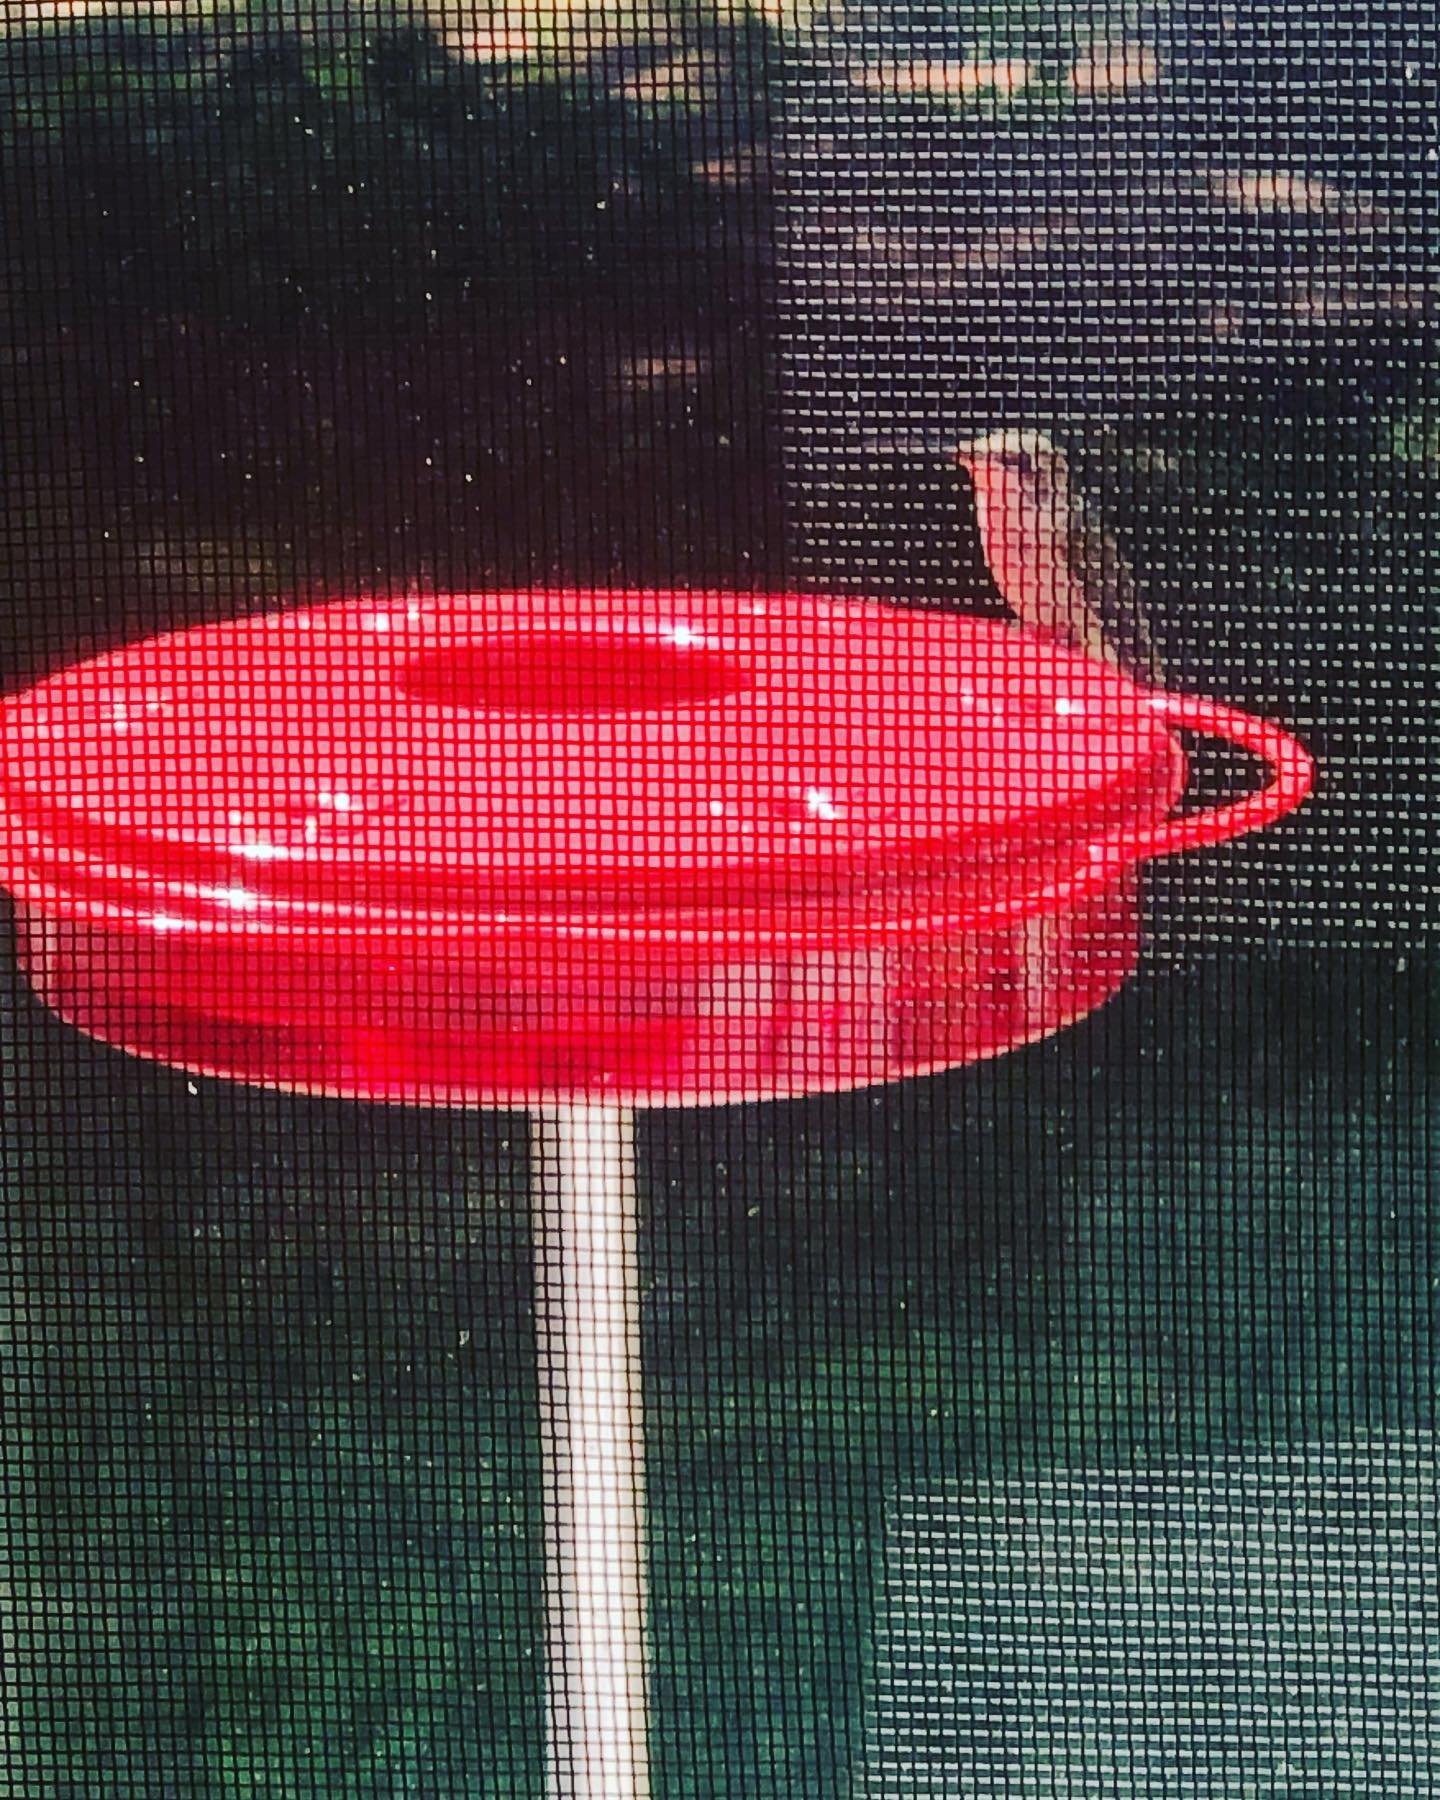 &ldquo;So l have a hummingbird who has been hanging around. Today he sat on the feeder for about 15 minutes. I'm so happy!&rdquo; Joanne D. in New Jersey

Speaking about The Ant-Mote&trade; has always been a little challenging because our primary goa